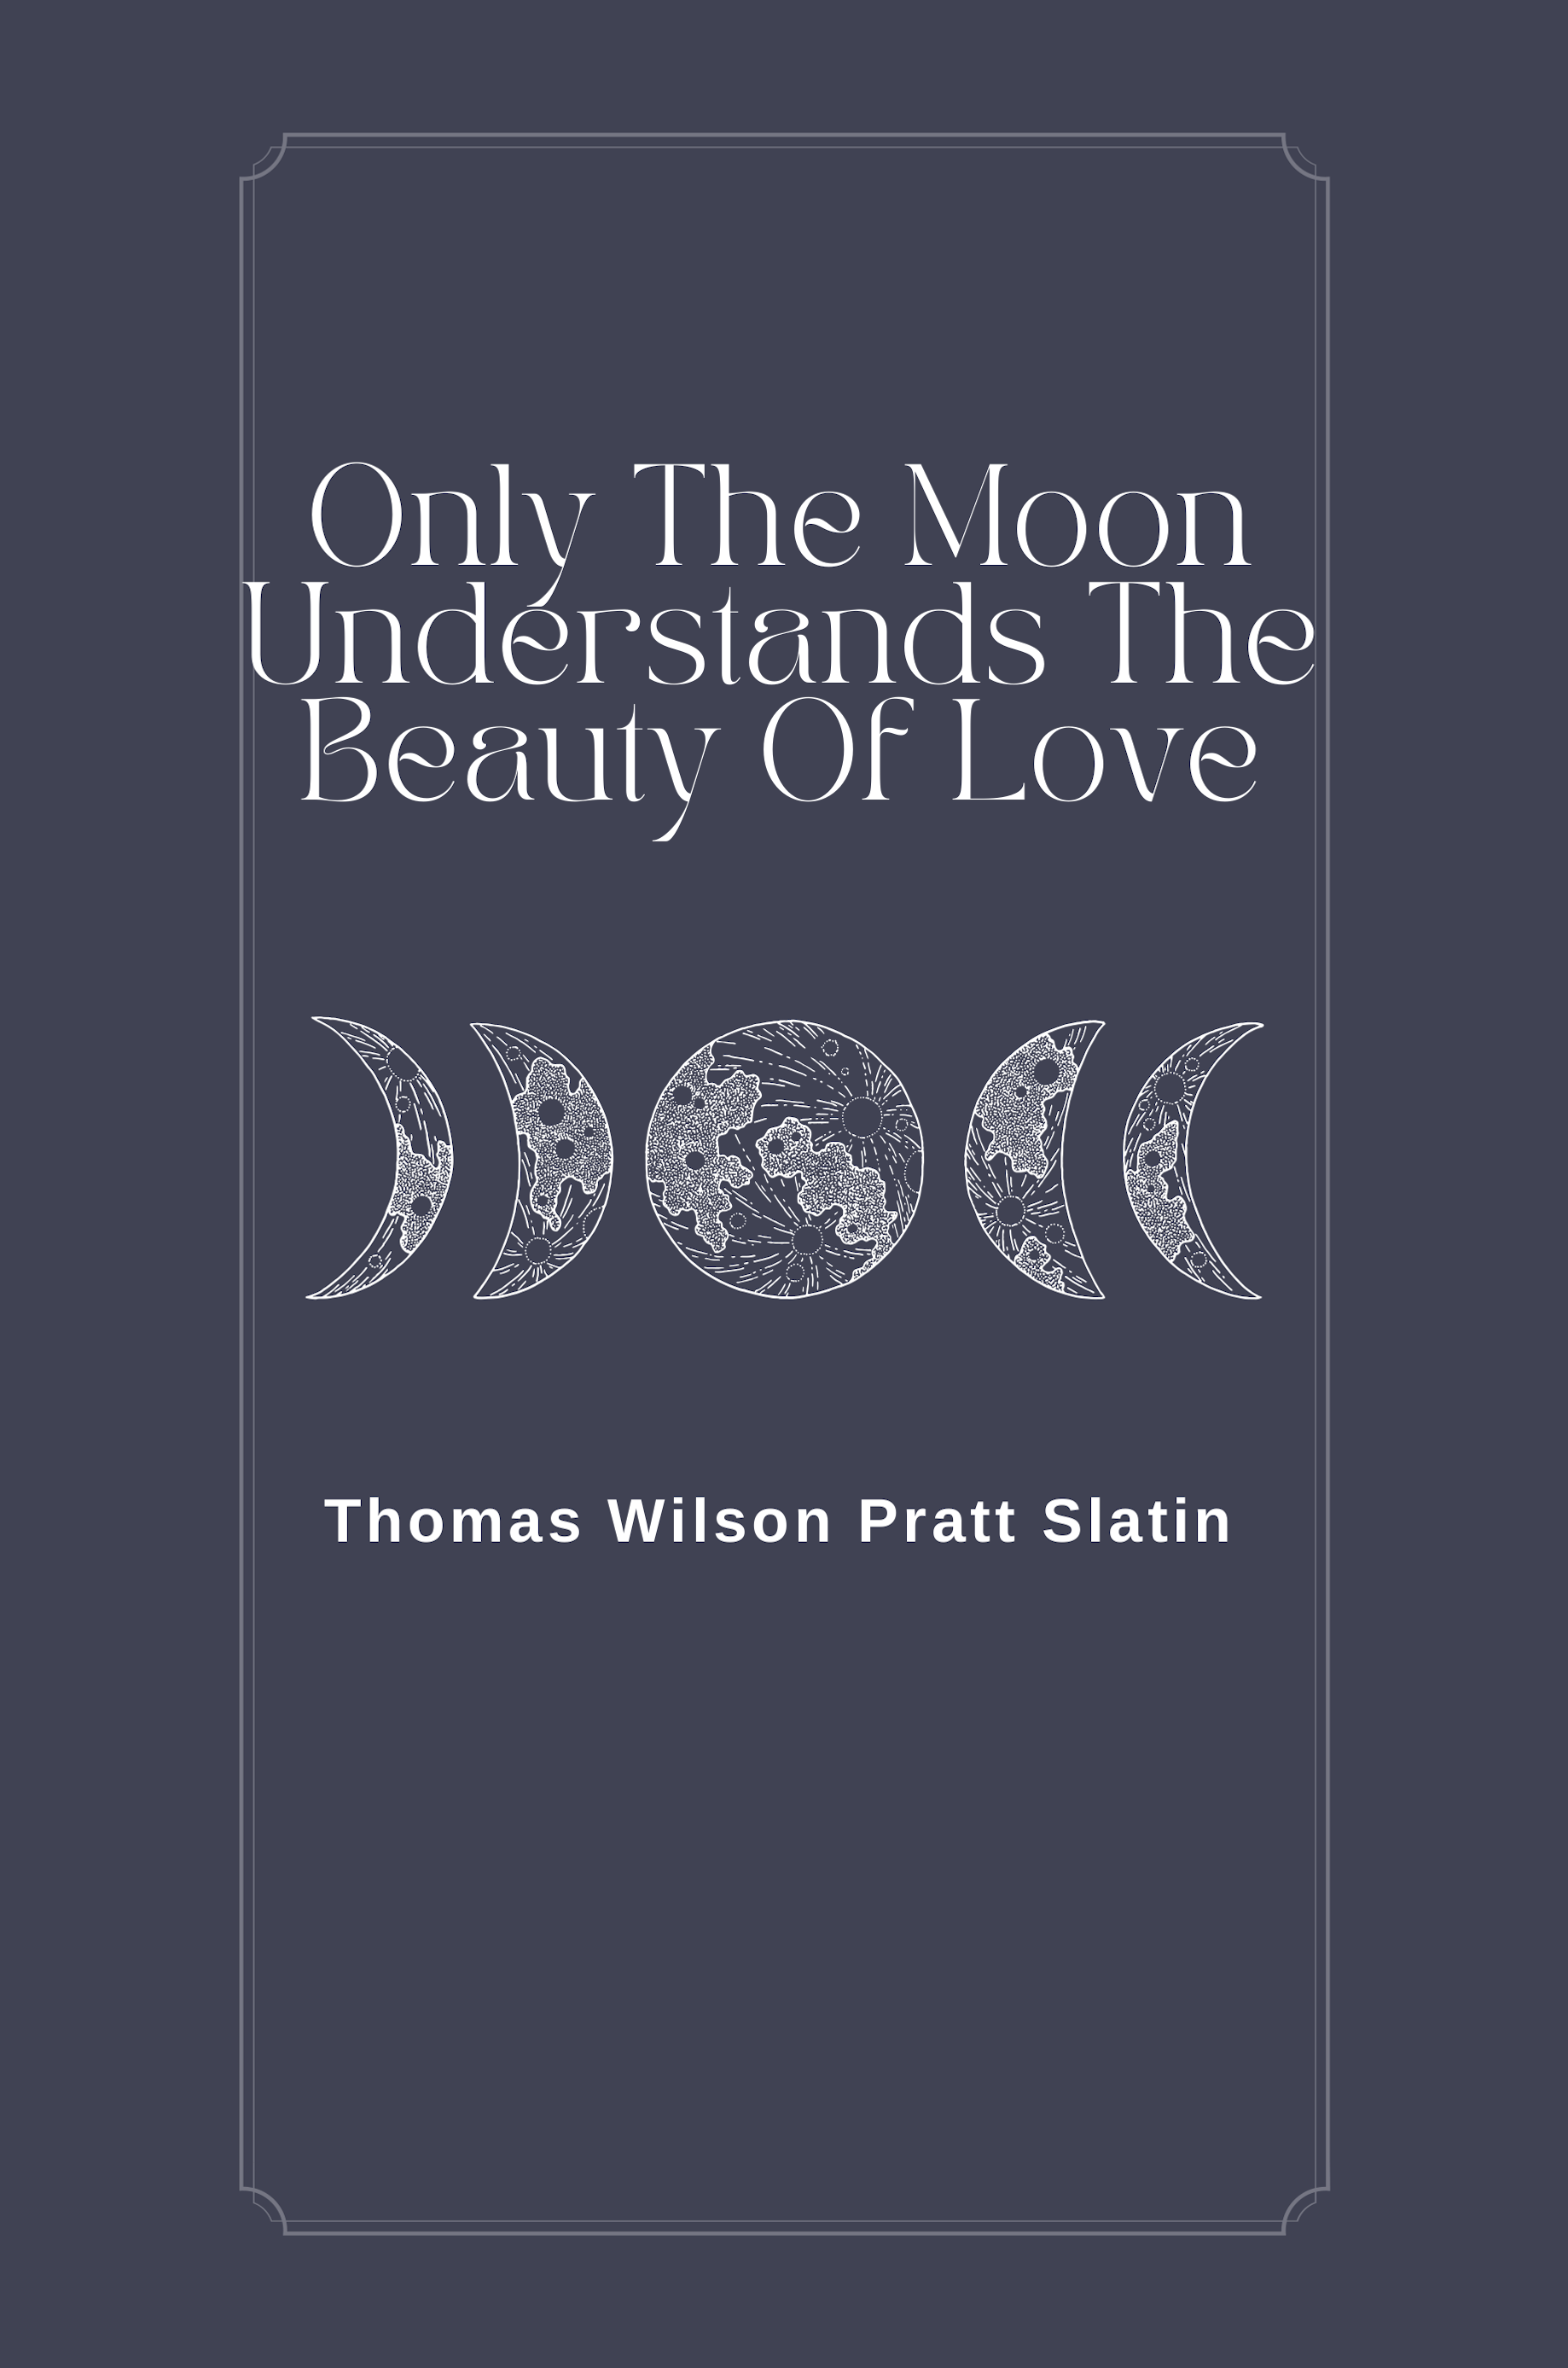 Only the Moon Understands the Beauty of Love Thomas Slatin